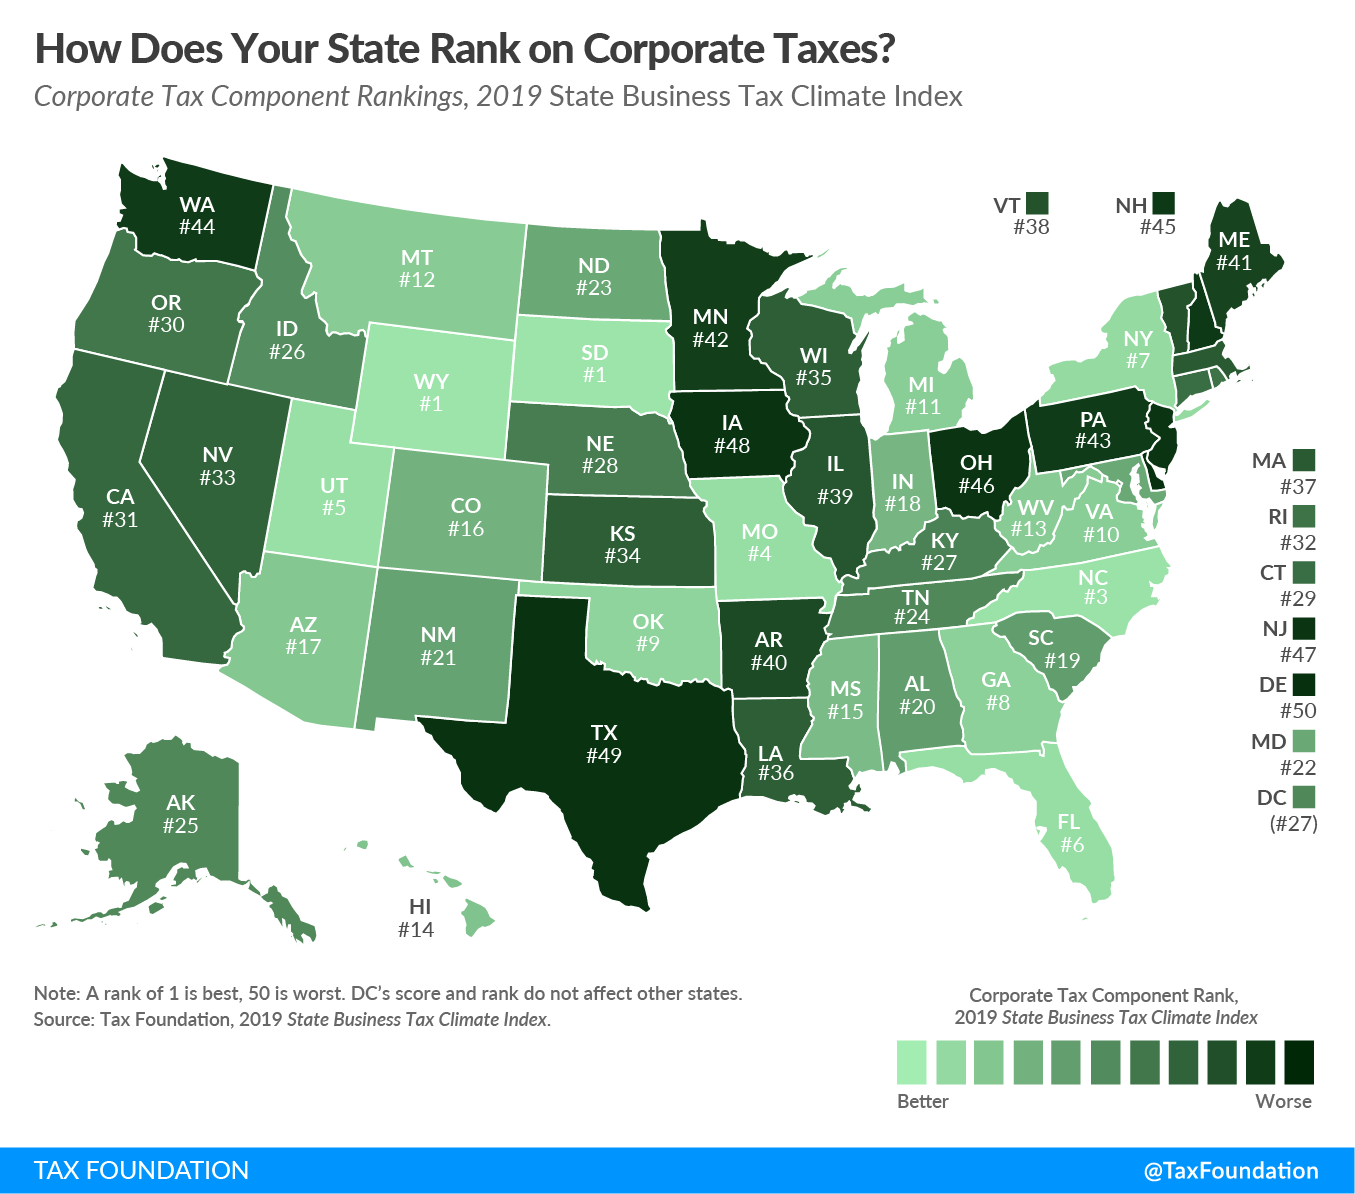 Corporate Income Tax Rankings on the 2019 State Business Tax Climate Index